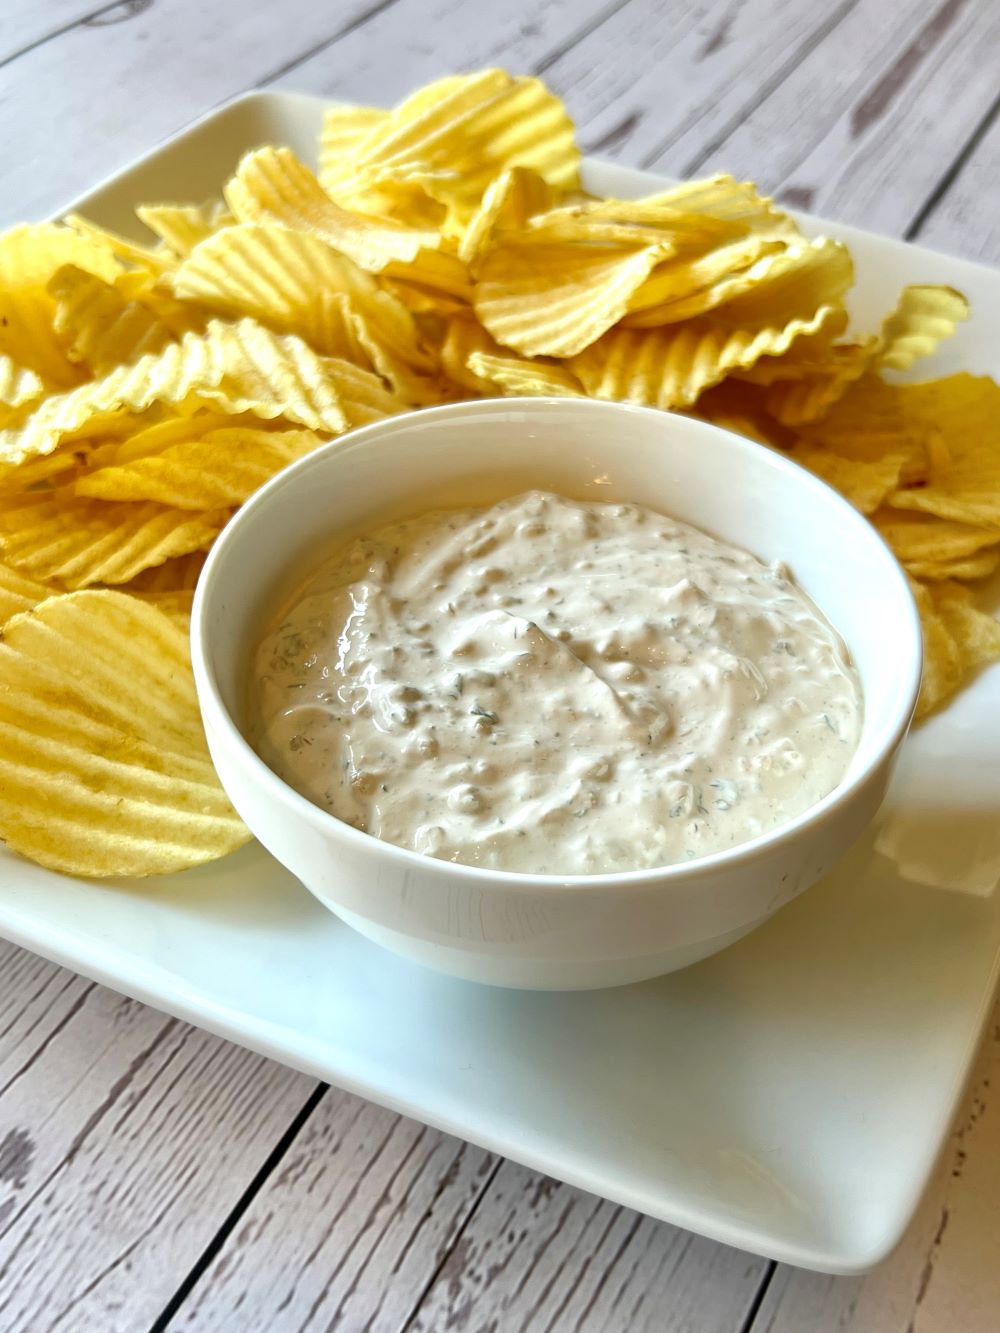 Plate with potato chips and onion dip